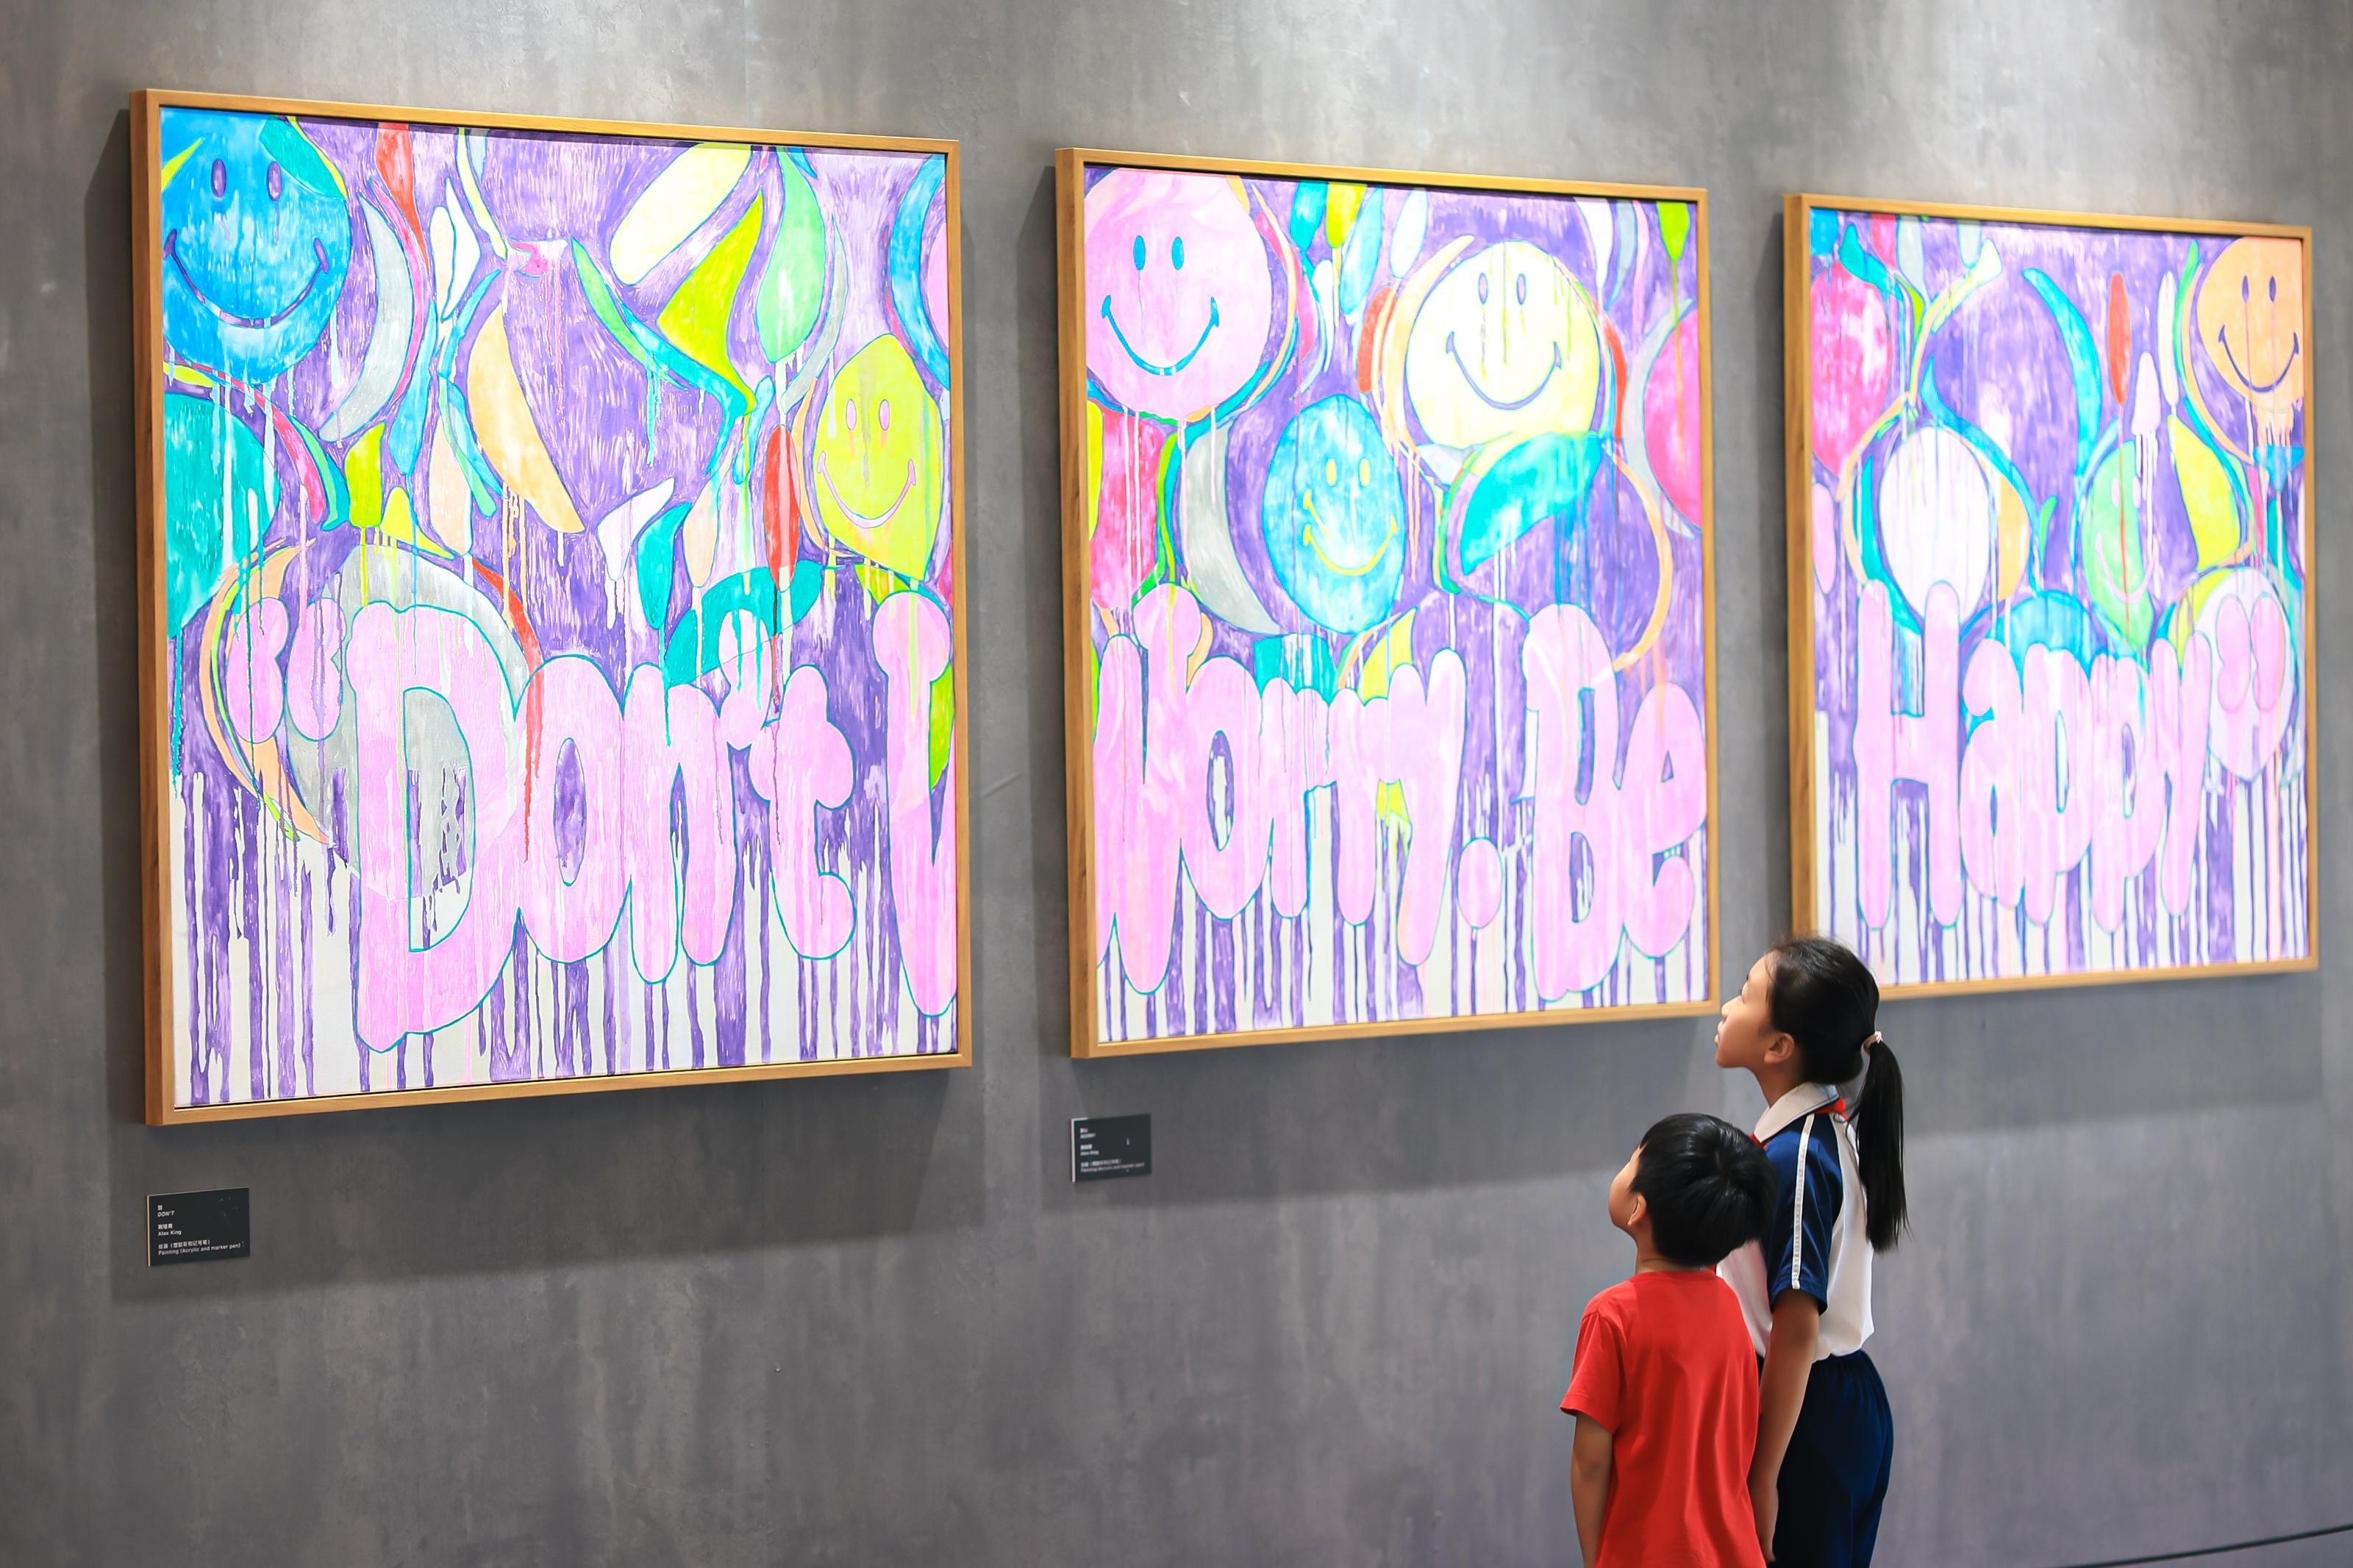 Co-organised by the Art Promotion Office and the Hong Kong Designers Association, the fifth exhibition of the second round of the "Art >< Creativity" exhibition series in the Greater Bay Area, "The Concrete Jungle", is open from today (September 26) to November 12 at Zhaoqing Museum. Photo shows visitors viewing the artwork "After Rain Comes the Rainbow" by designer Alex King.